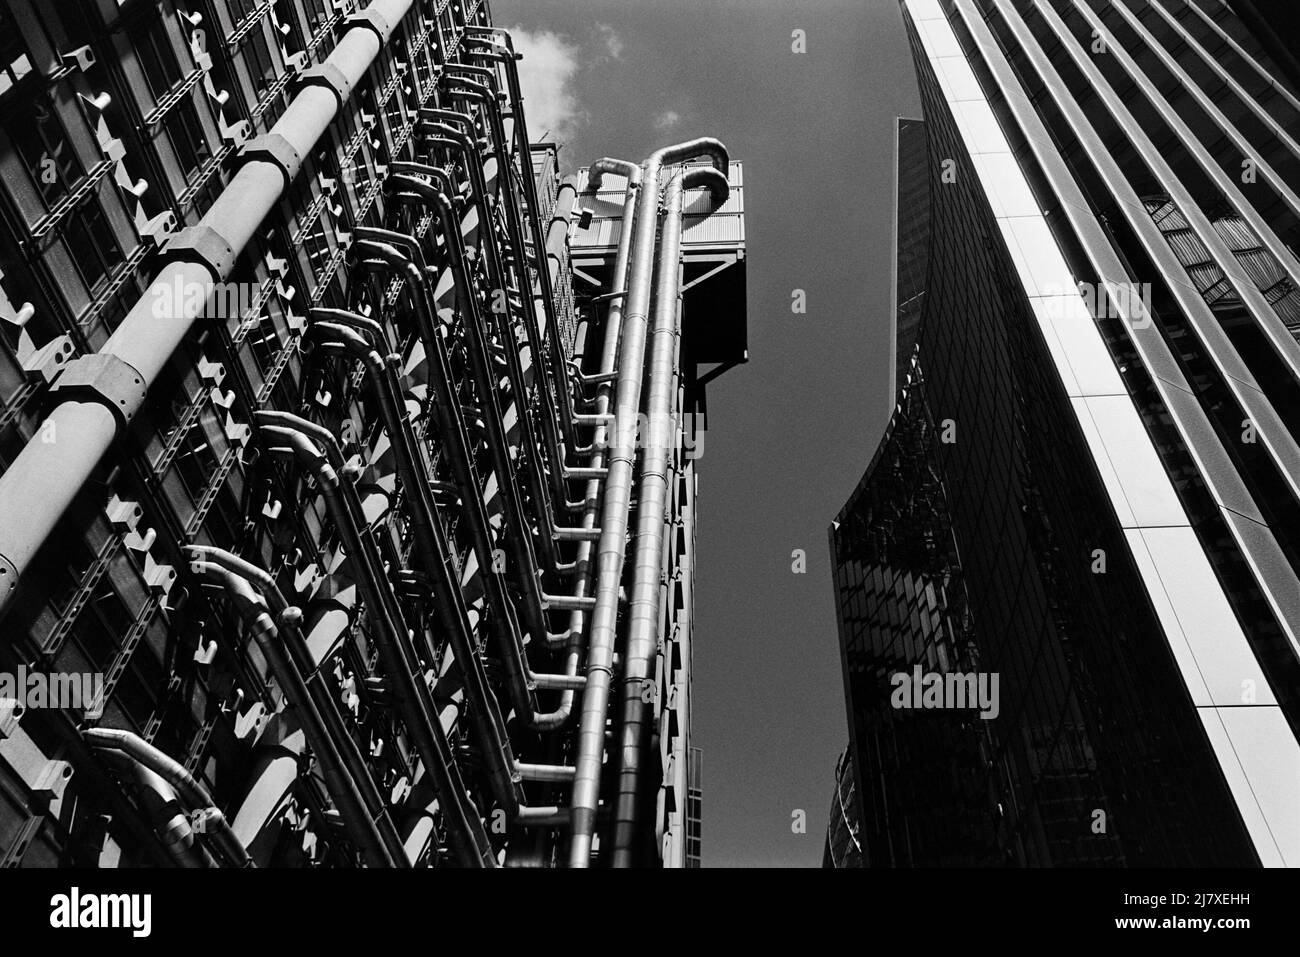 The Lloyds Building exterior in the City of London, South East England, looking upwards Stock Photo